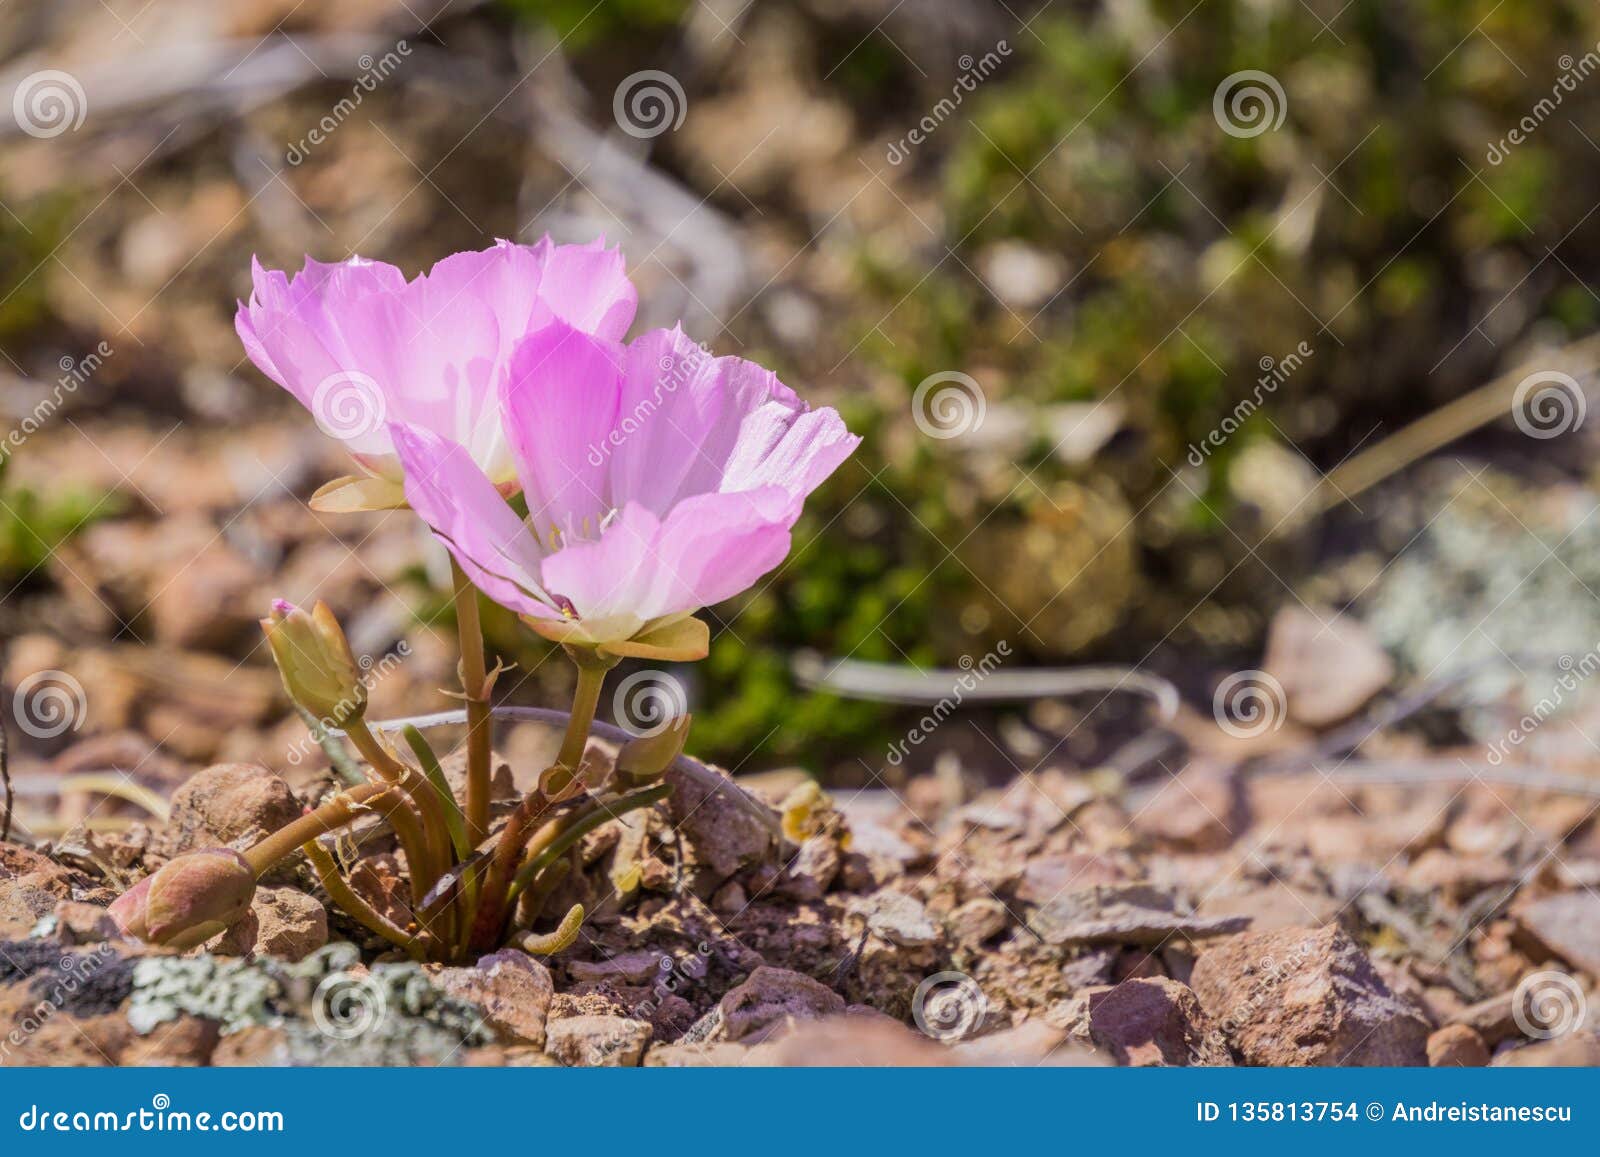 Bitterroot Lewisia Rediviva The State Flower Of Montana Blooming In Spring In Pinnacles National Park California Stock Photo Image Of Gravel Floral 135813754